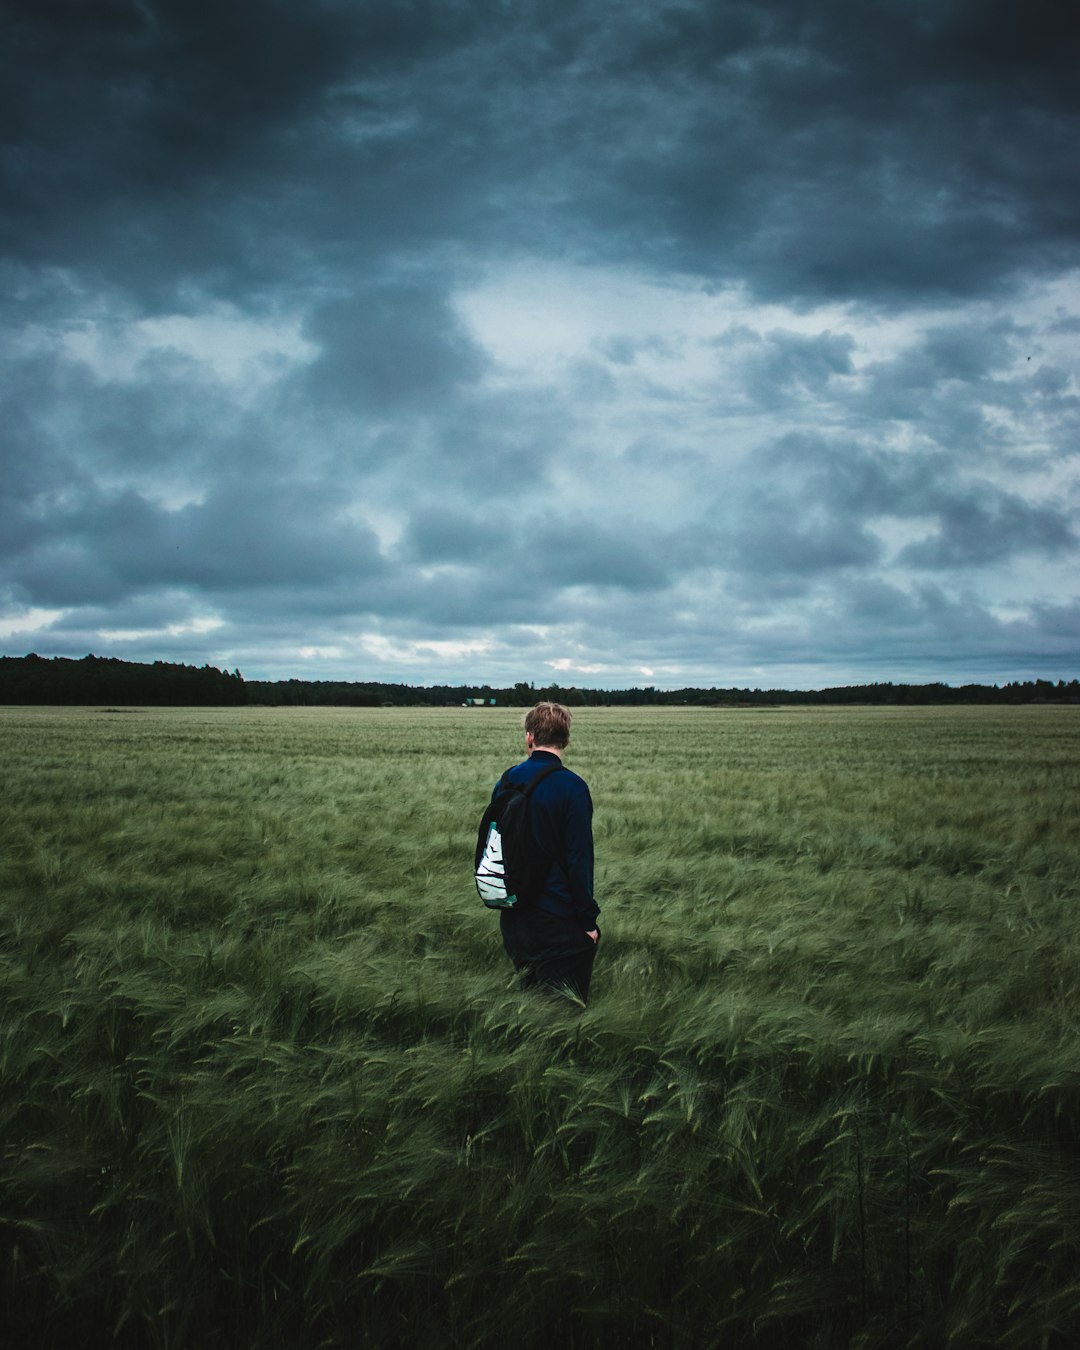 man in blue jacket standing on green grass field under gray clouds during daytime